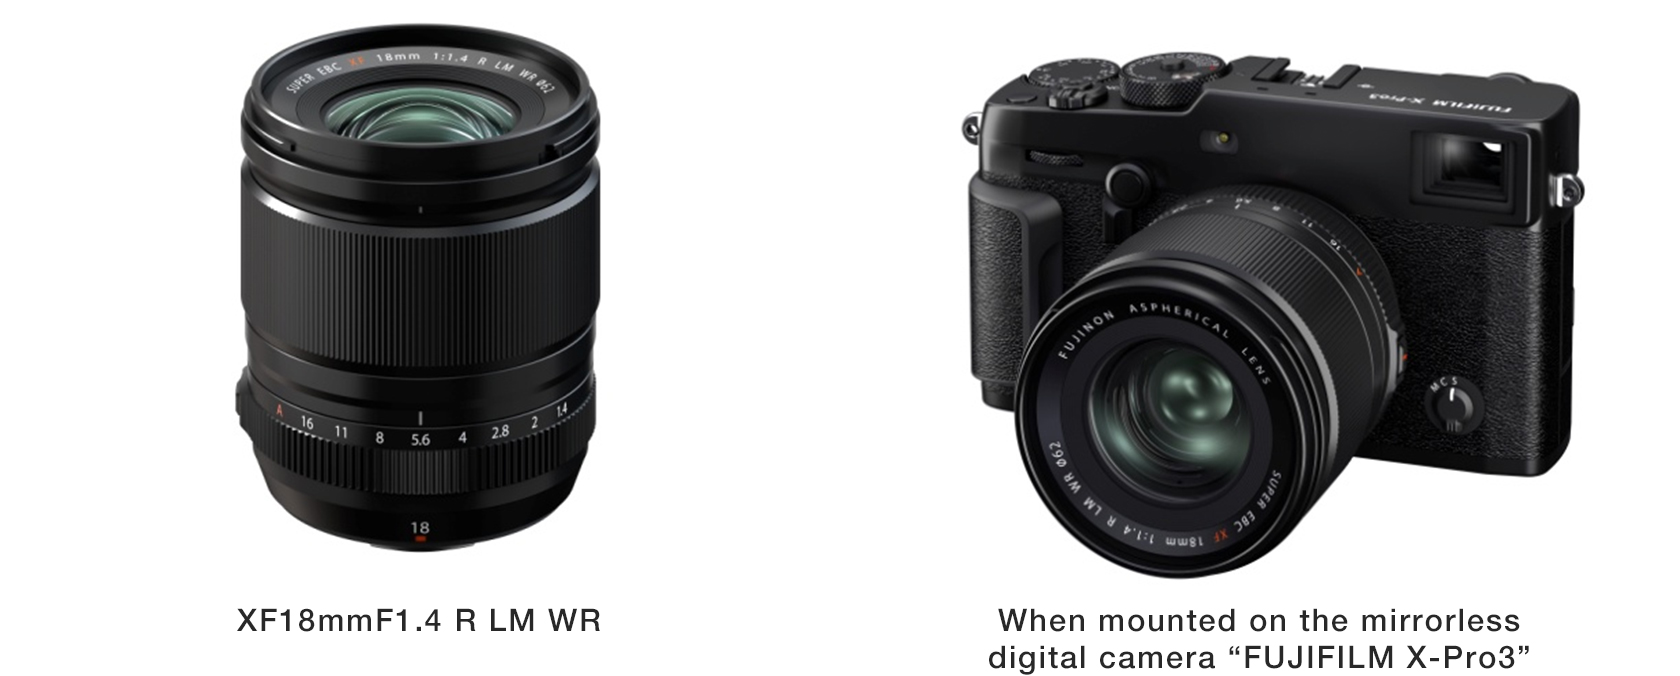 [Image]XF18mmF1.4 R LM WR / When mounted on the mirrorless digital camera FUJIFILM X-Pro3